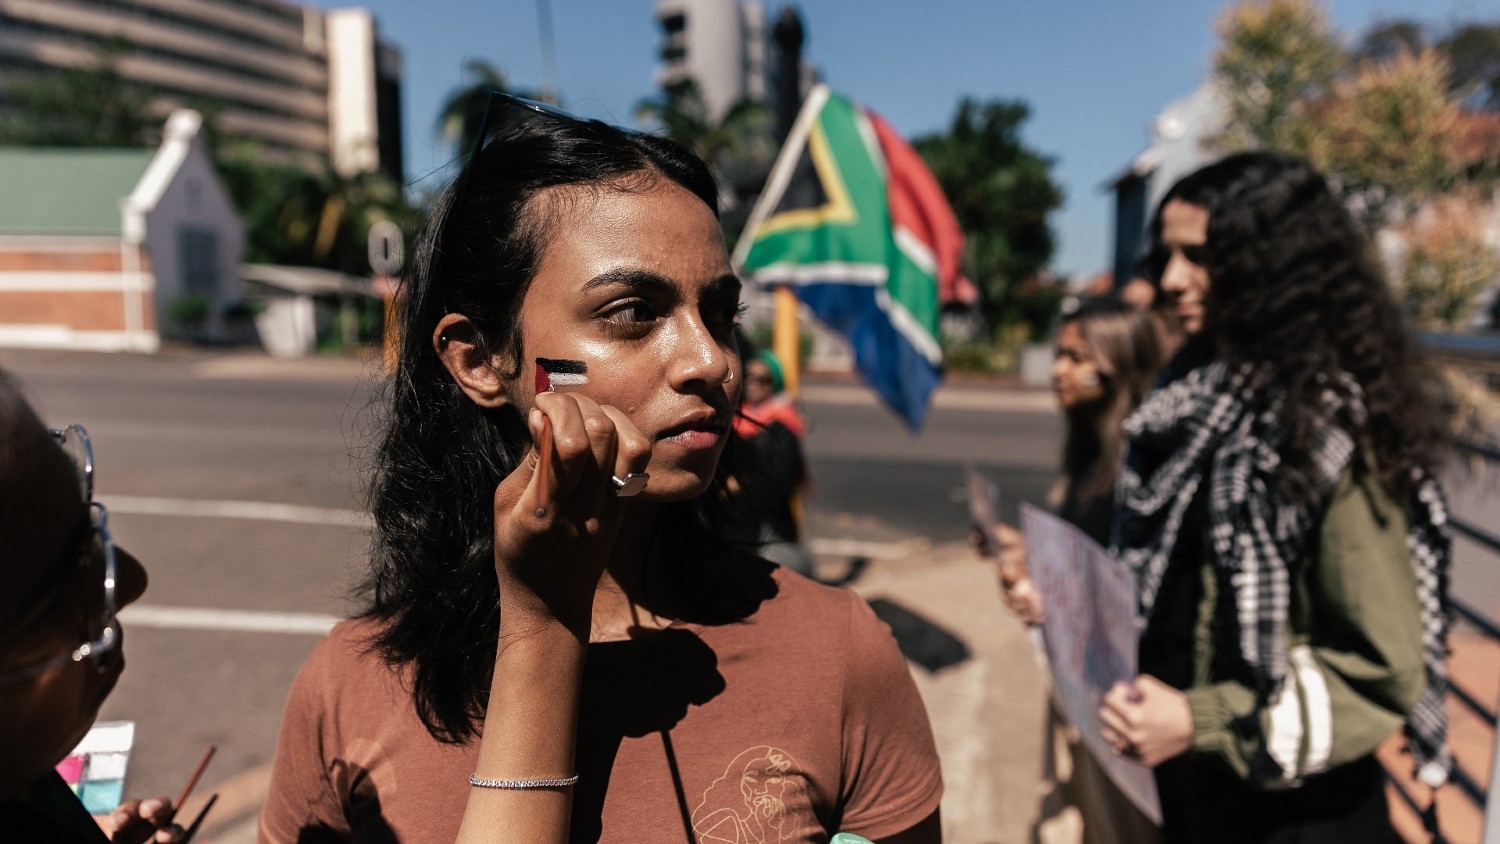 A young activist gets her face painted with a Palestinian flag during a demonstration in support of Palestine in Durban on 13 October 2023.